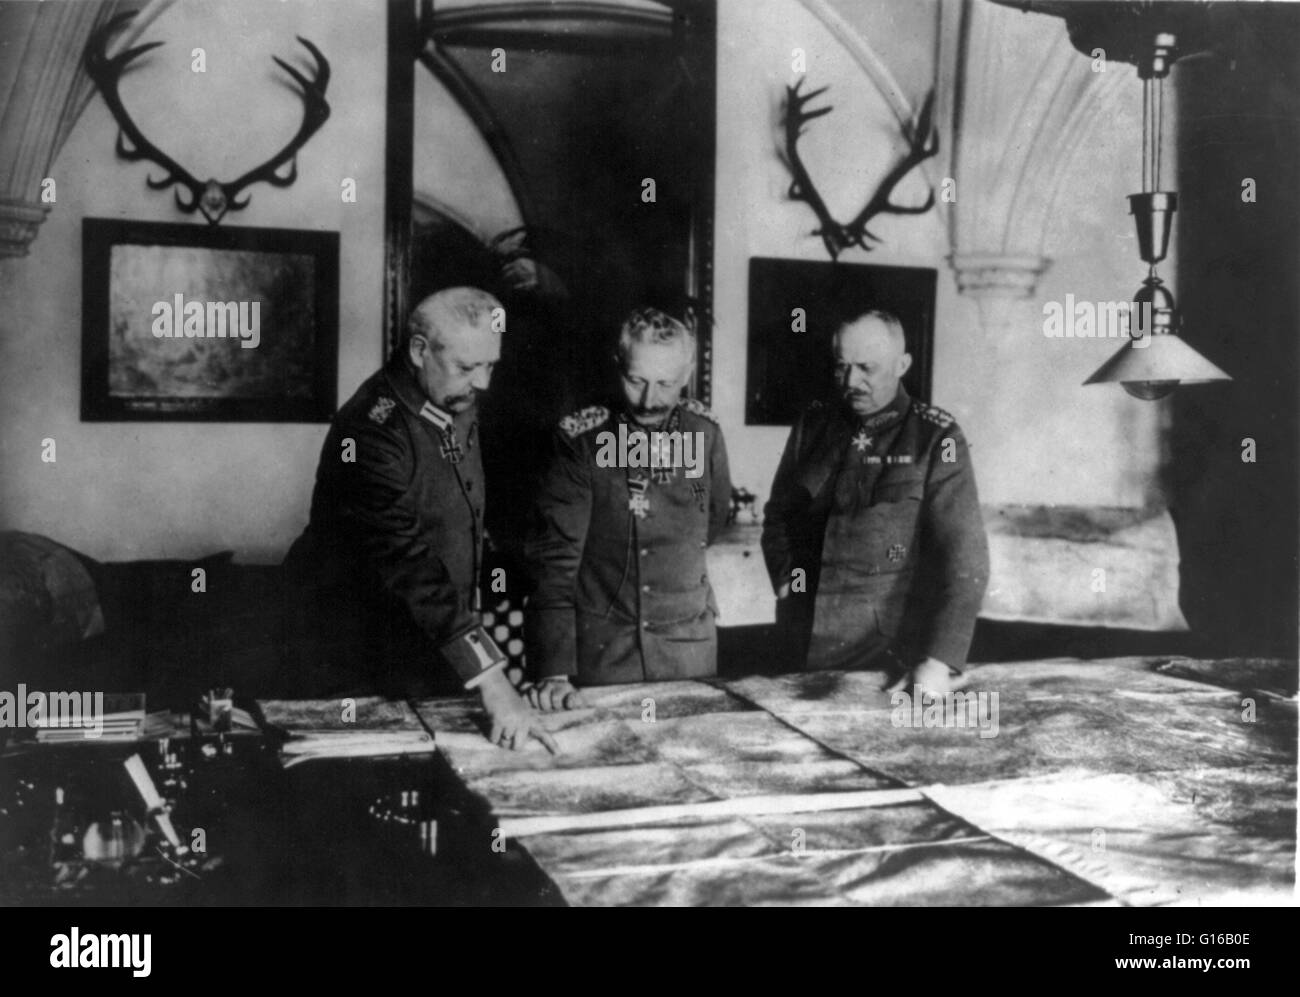 Photograph shows General Paul von Hindenburg, Kaiser Wilhelm II, and General Erich Ludendorff standing at a table, examining large maps, circa 1914-18. Wilhelm II (January 27, 1859 - June 4, 1941) was the last German Kaiser and King of Prussia, ruling the Stock Photo